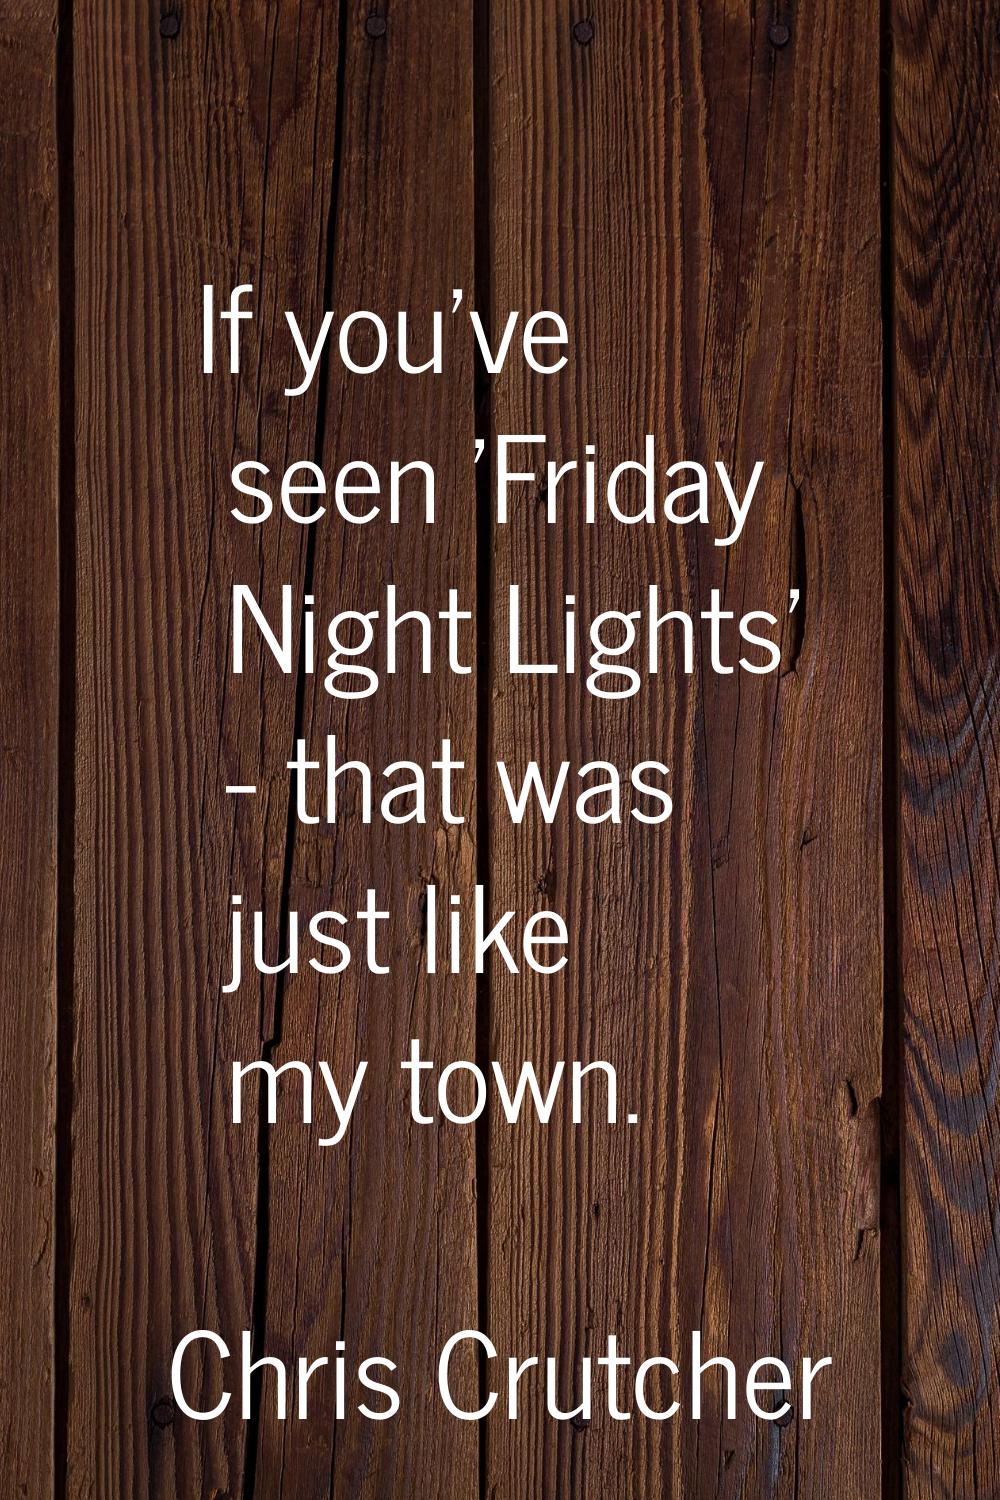 If you've seen 'Friday Night Lights' - that was just like my town.